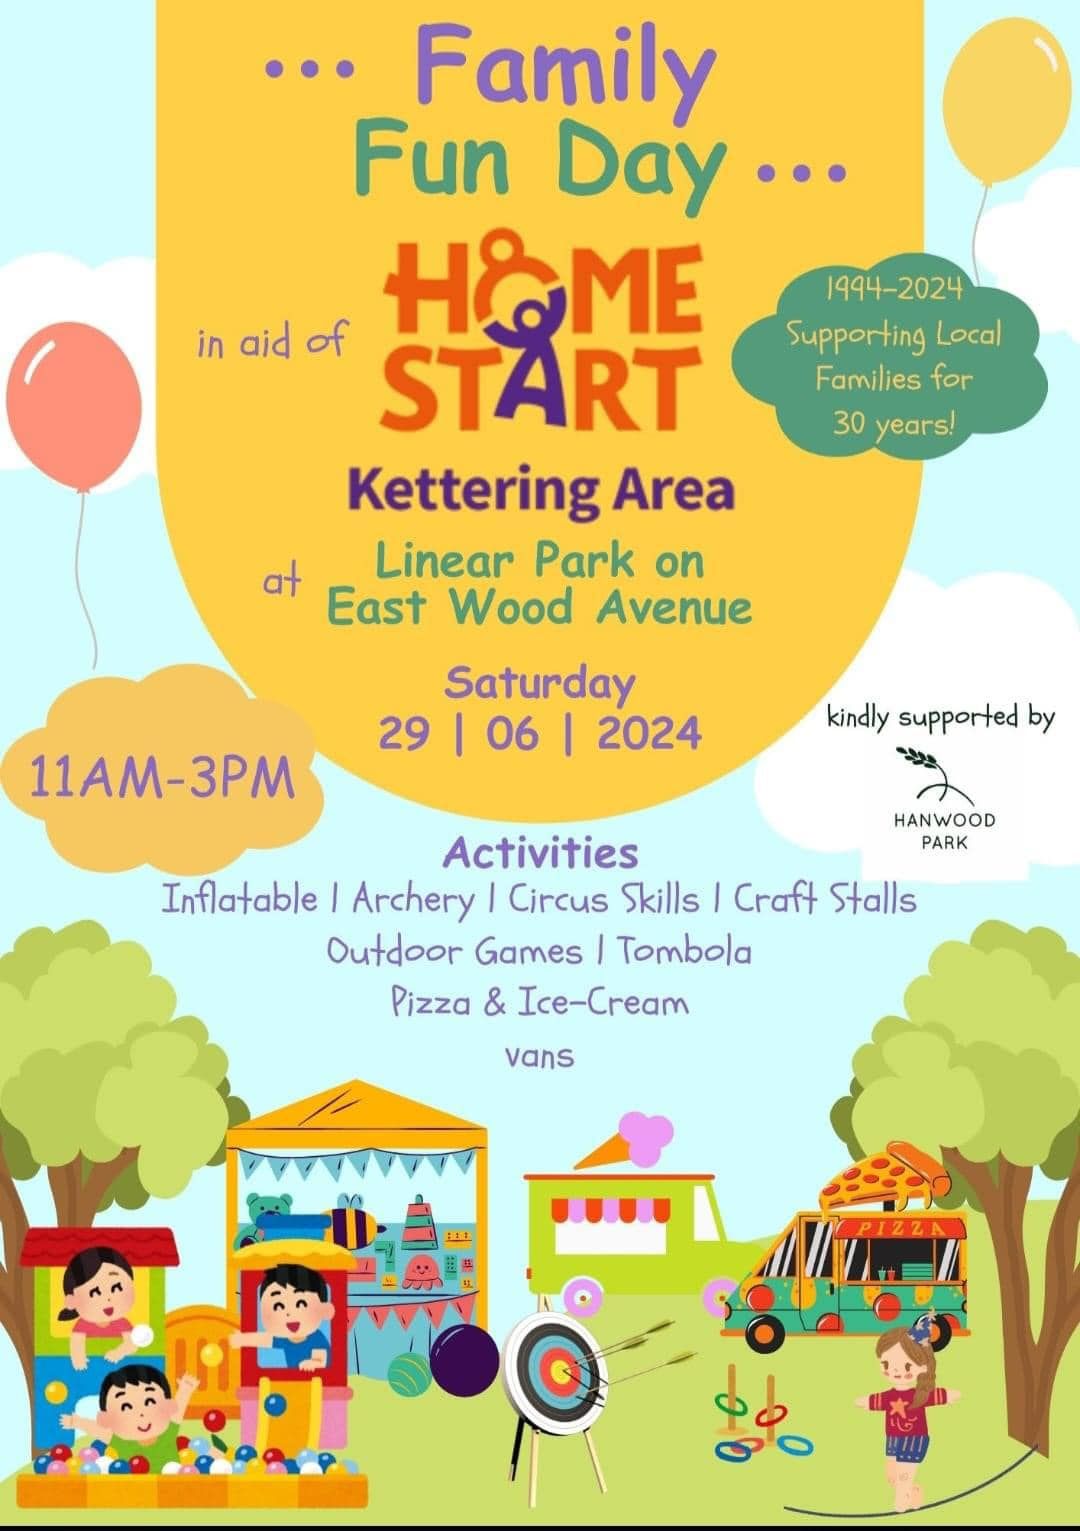 Family Fun Day for Home-Start Kettering